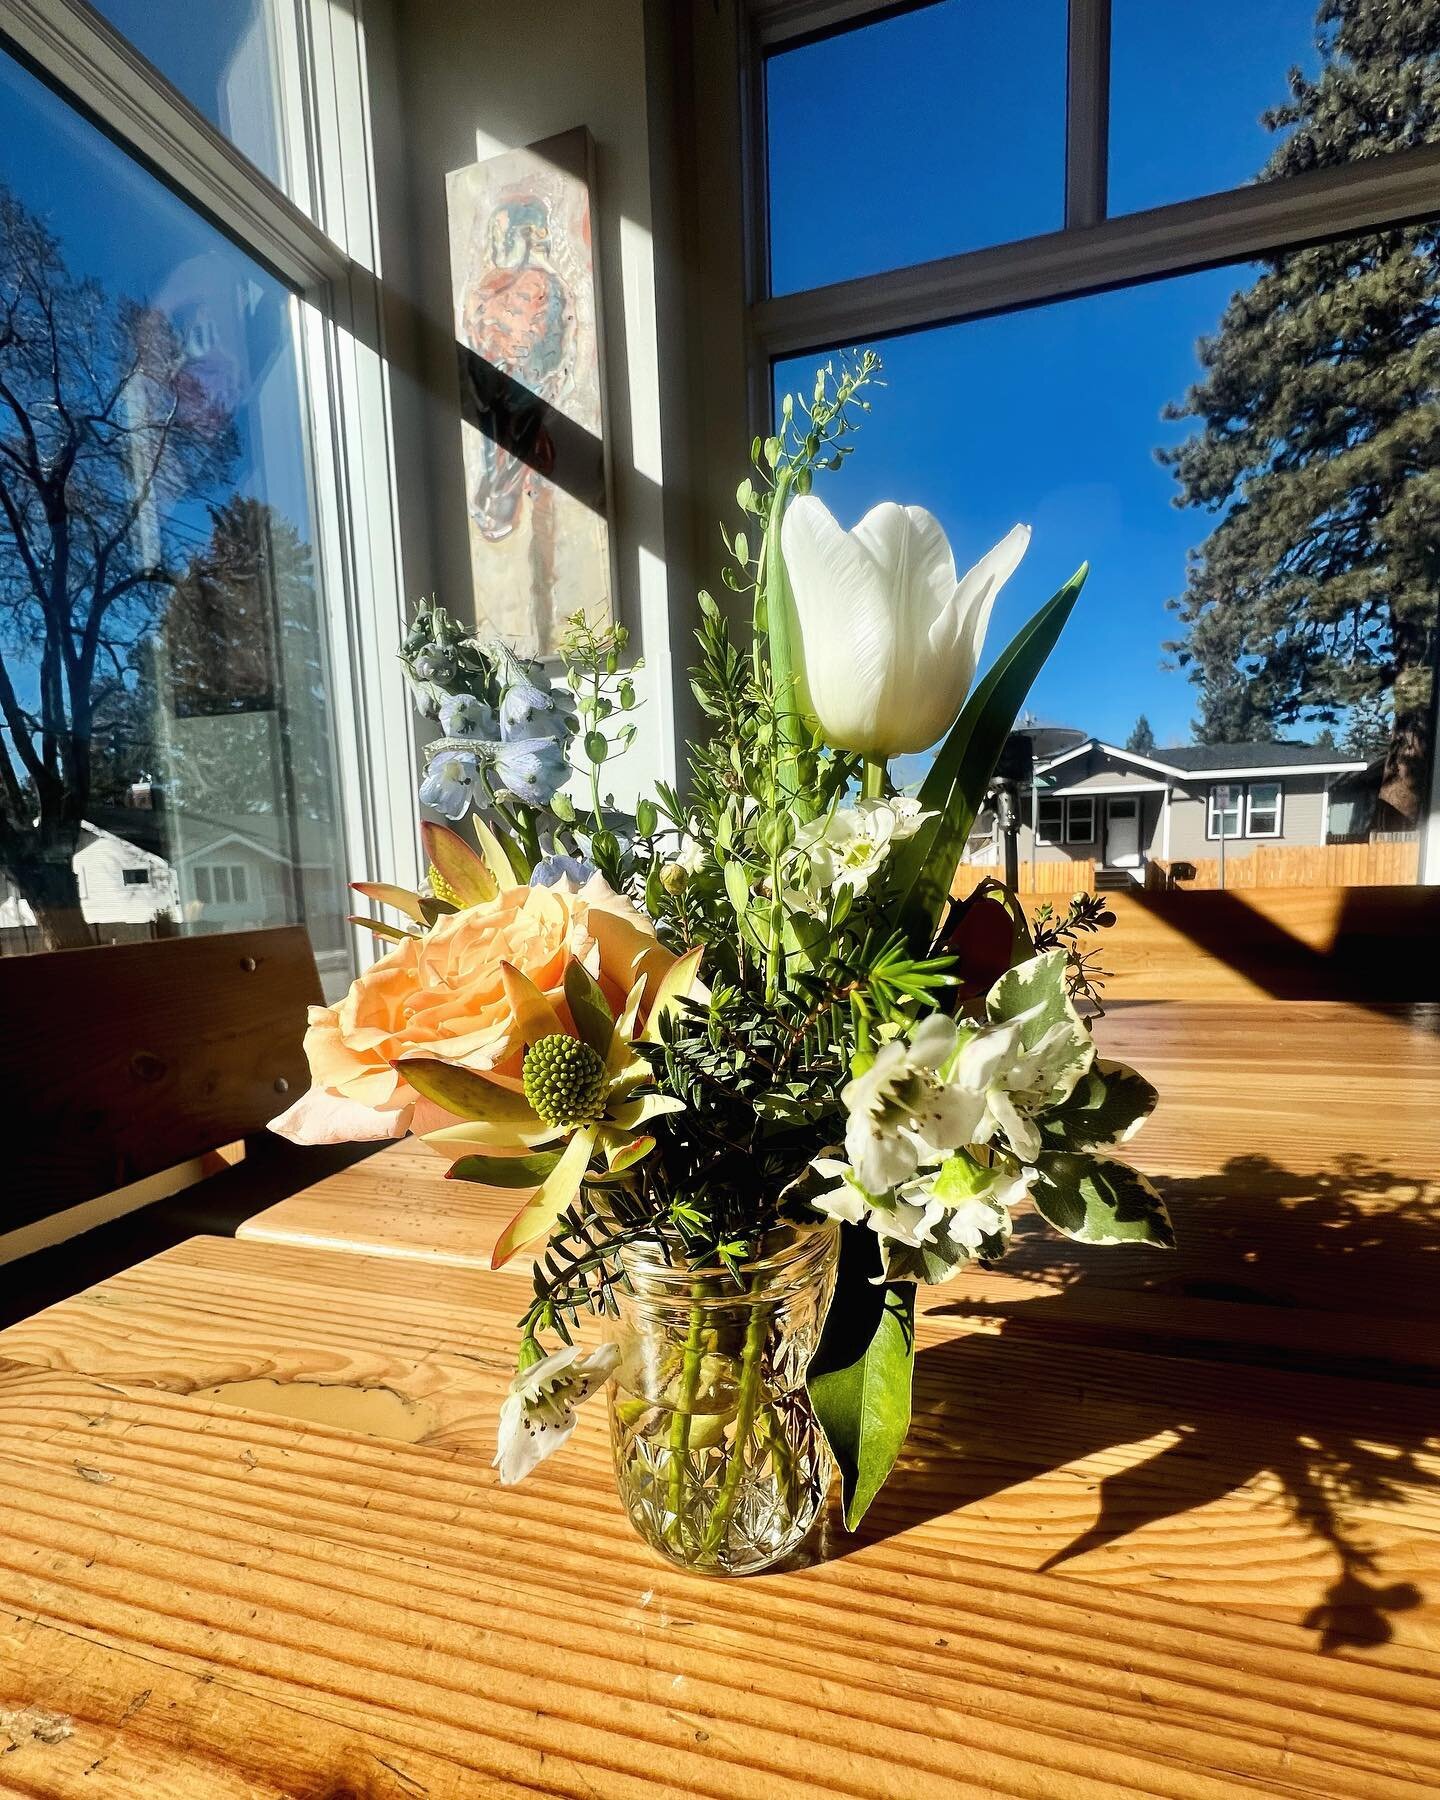 Taking a sweet, sunny moment to admire the work of some of our favorite local artists in Bend ✌🏼 If you didn&rsquo;t know, we are now displaying bouquets from @flowersbyeryn ! She has been a loyal customer and friend to Jackson&rsquo;s for a long ti